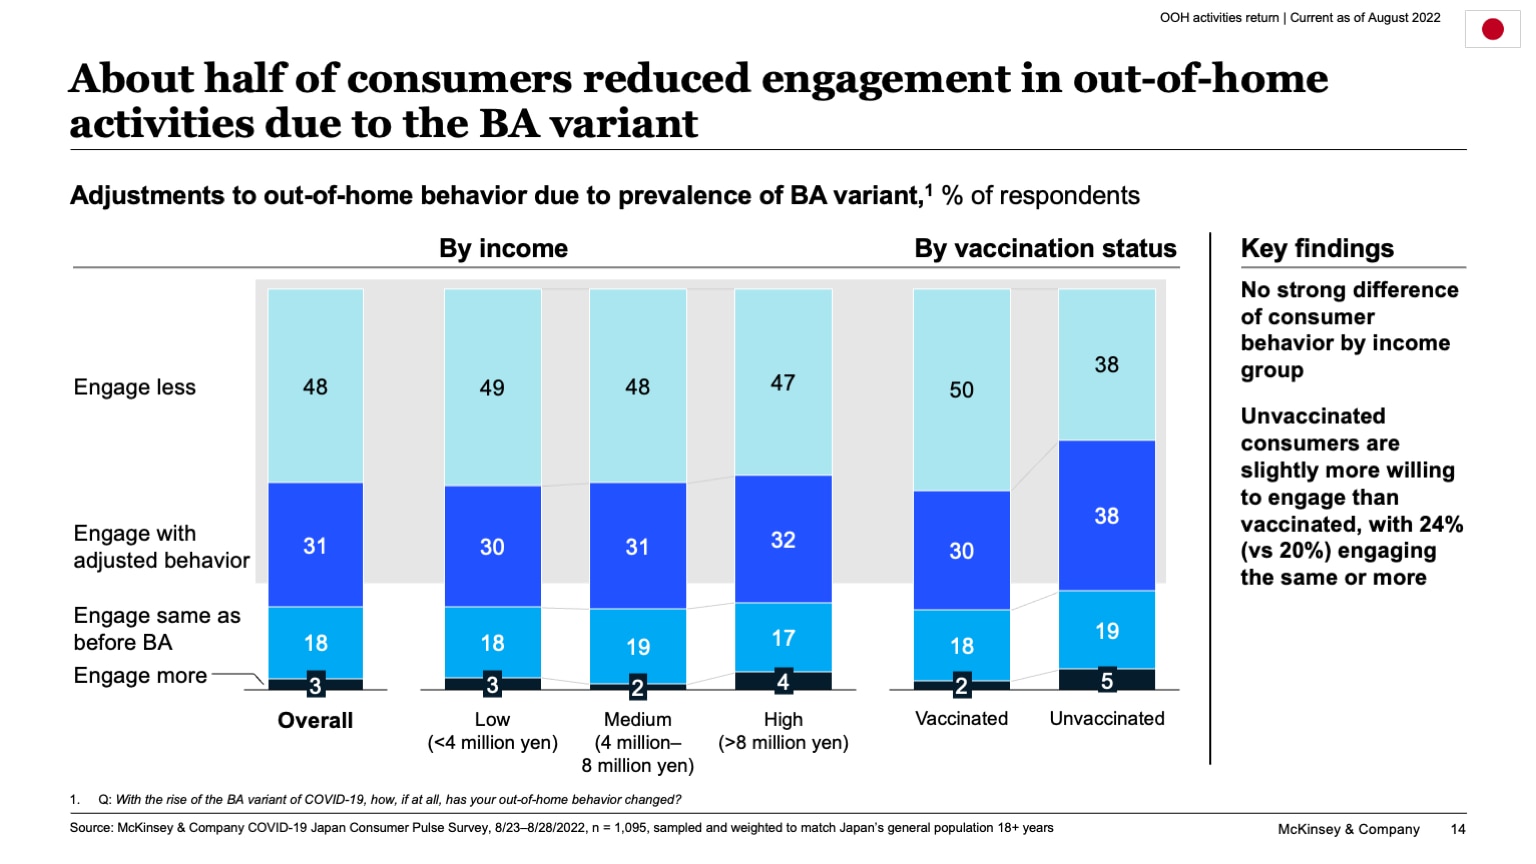 About half of consumers reduced engagement in out-of-home activities due to the BA variant